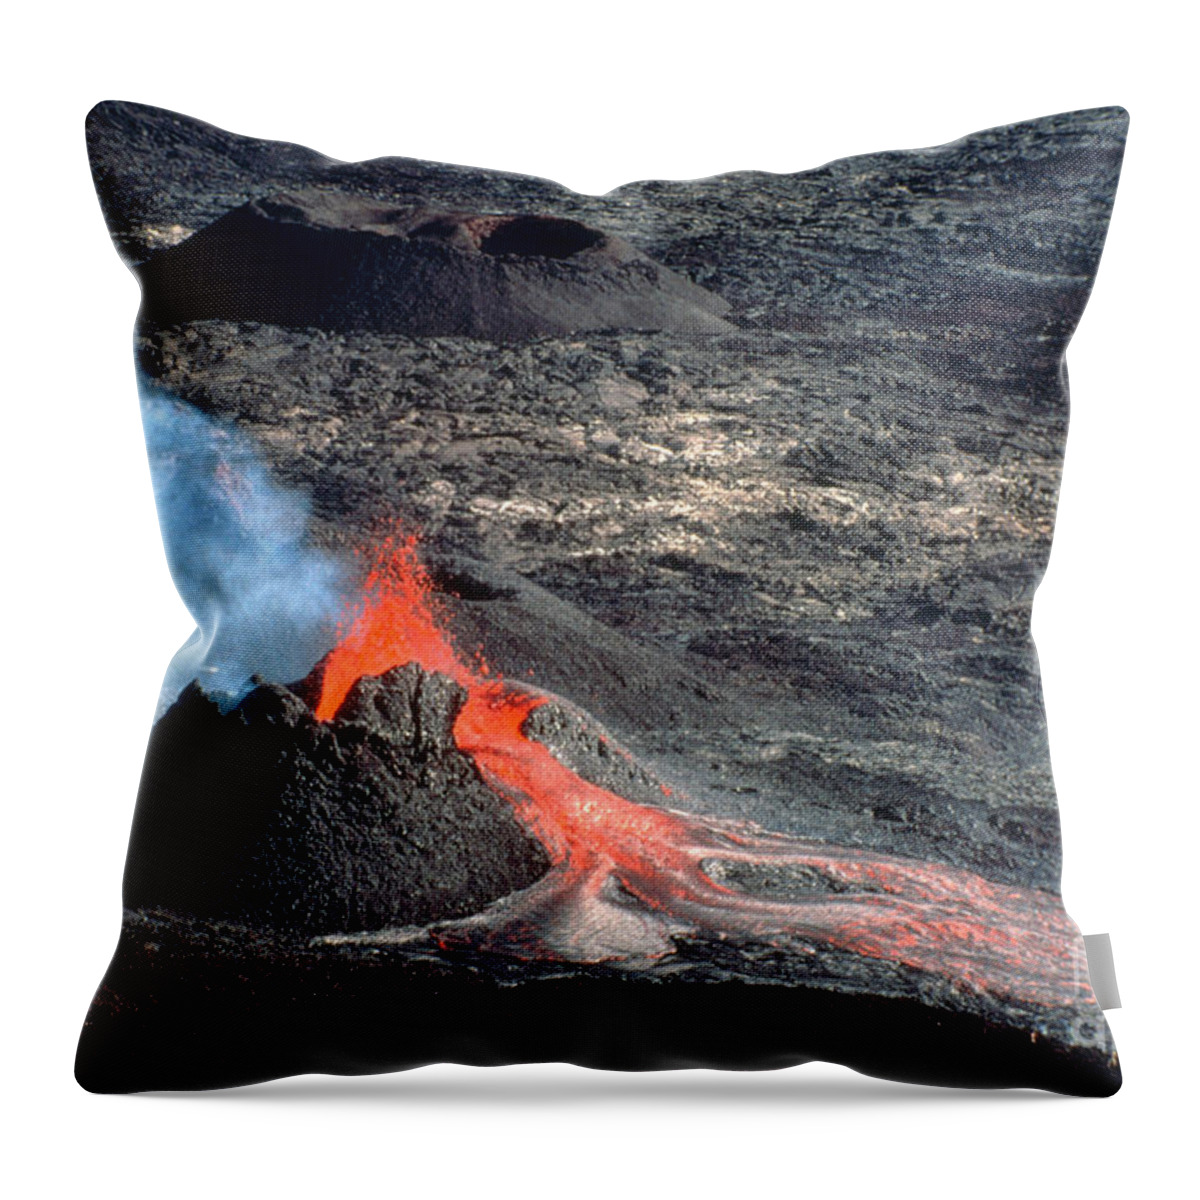 Eruption Cone Throw Pillow featuring the photograph Eruption Cone, La Fournaise by Adam Sylvester